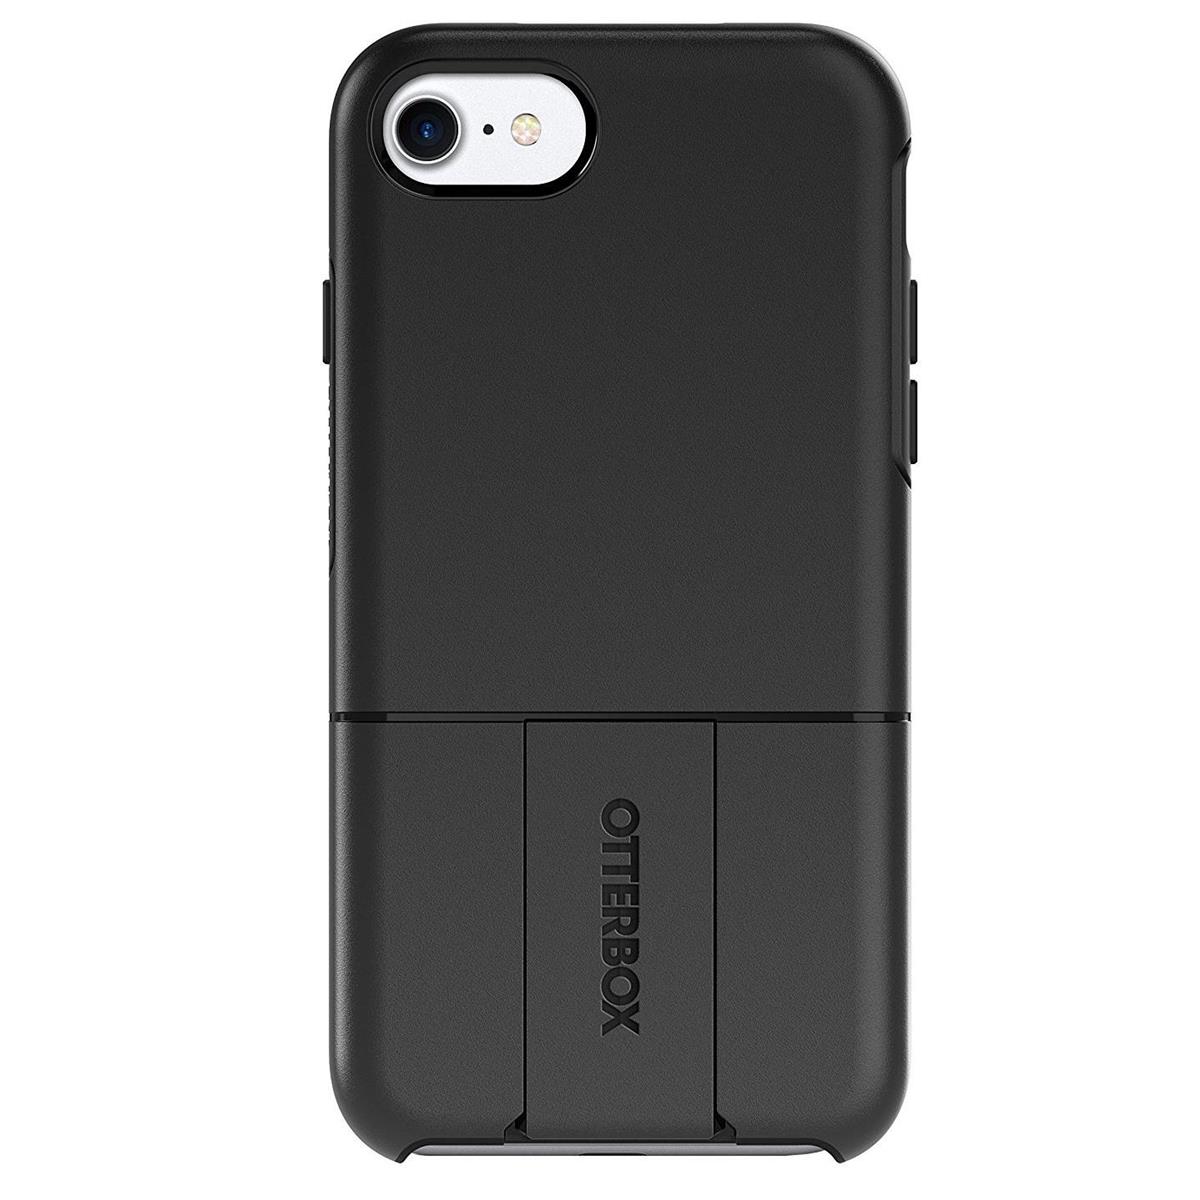 Image of OtterBox UniVERSE Module Case for iPhone 7/ iPhone 8 - Black